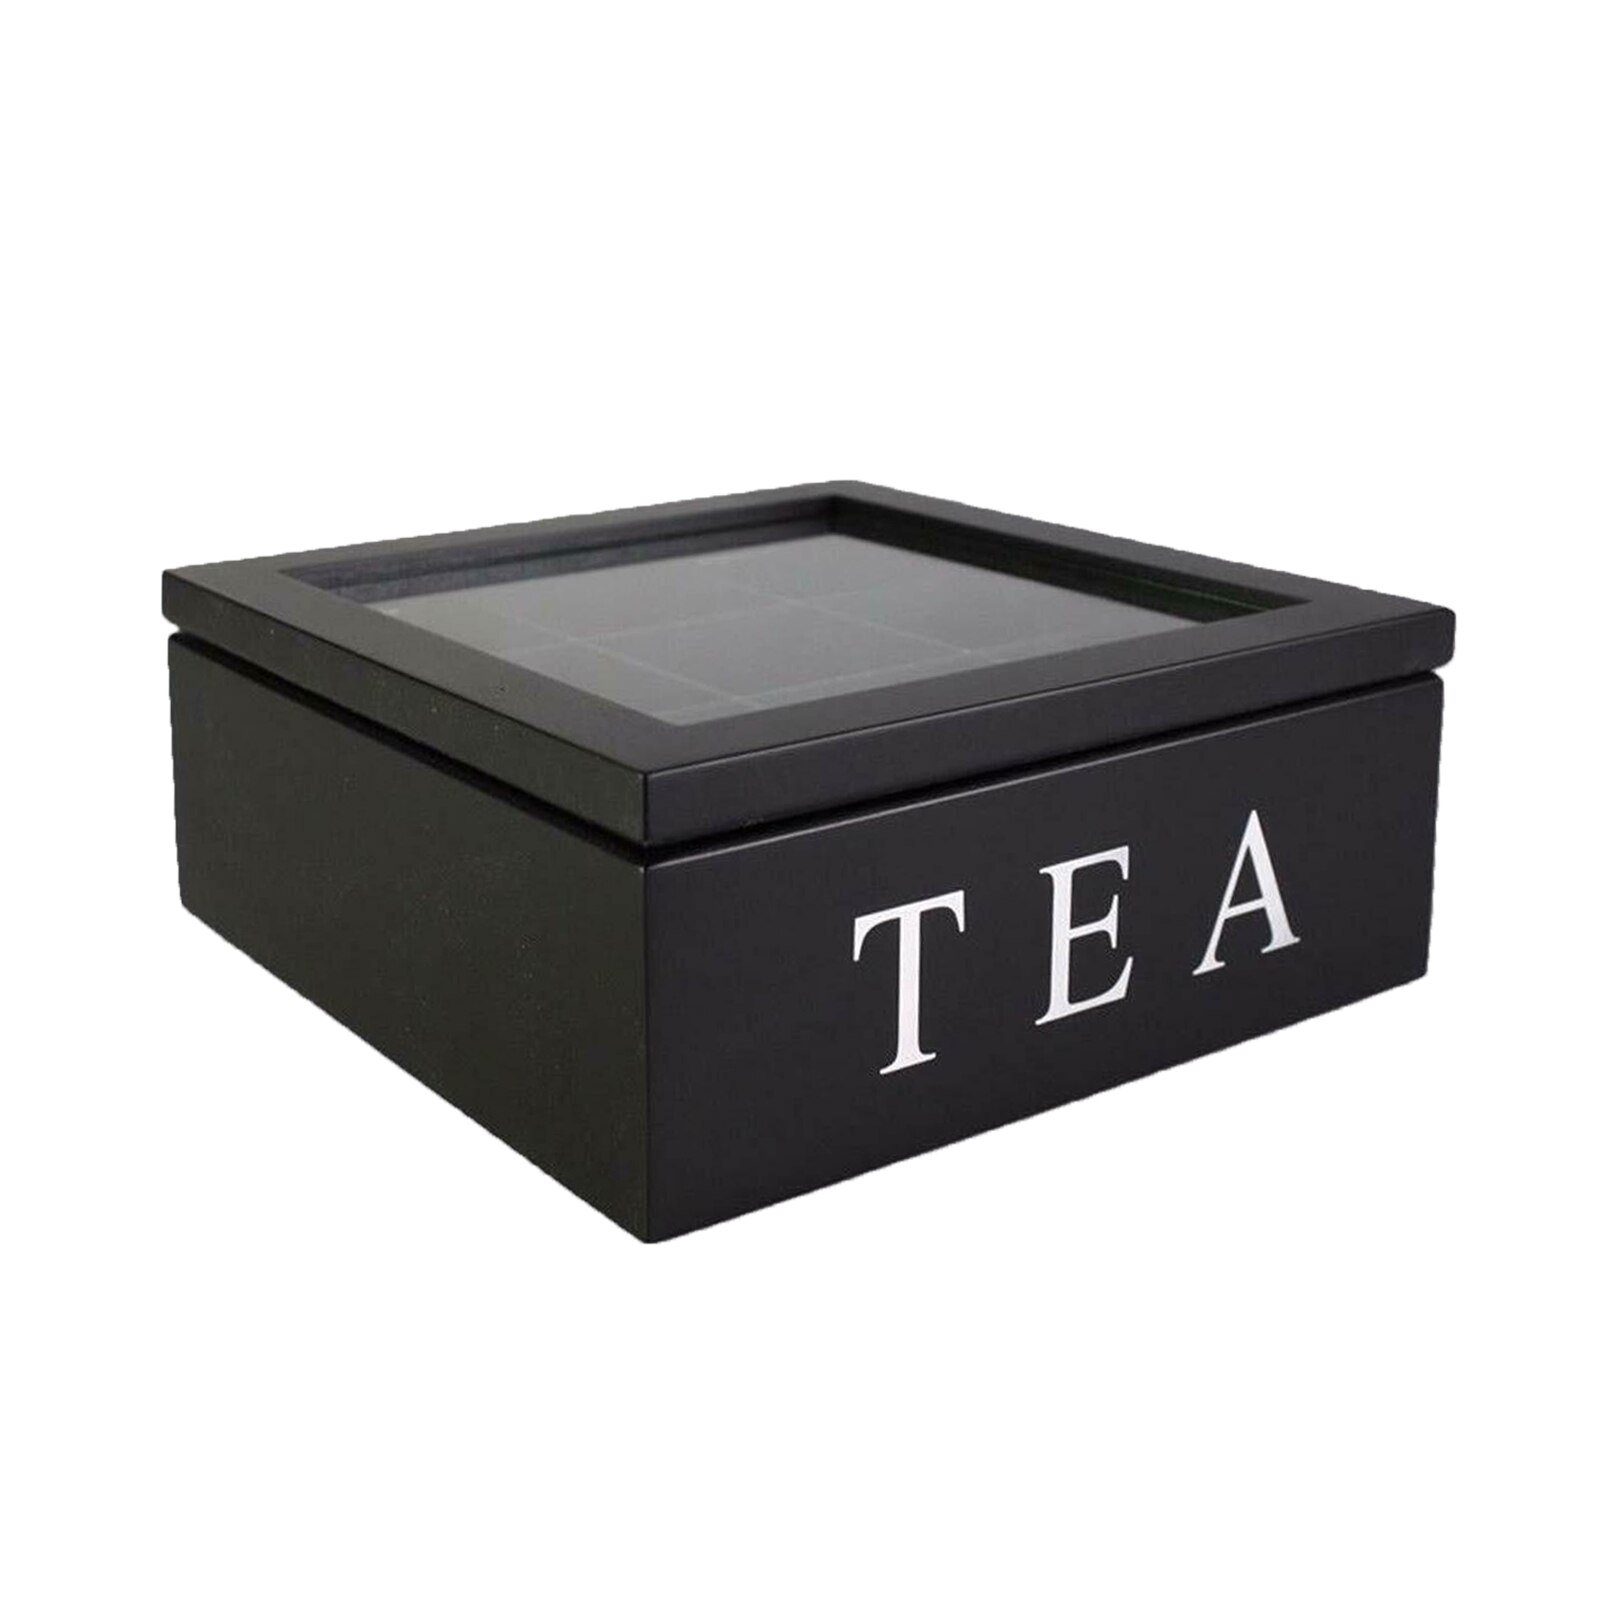 Wooden Tea Box With Lid 9-Compartment Retro Style Coffee Tea Bag Storage Holder Organizer For Kitchen Cabinets home Kitchen: B